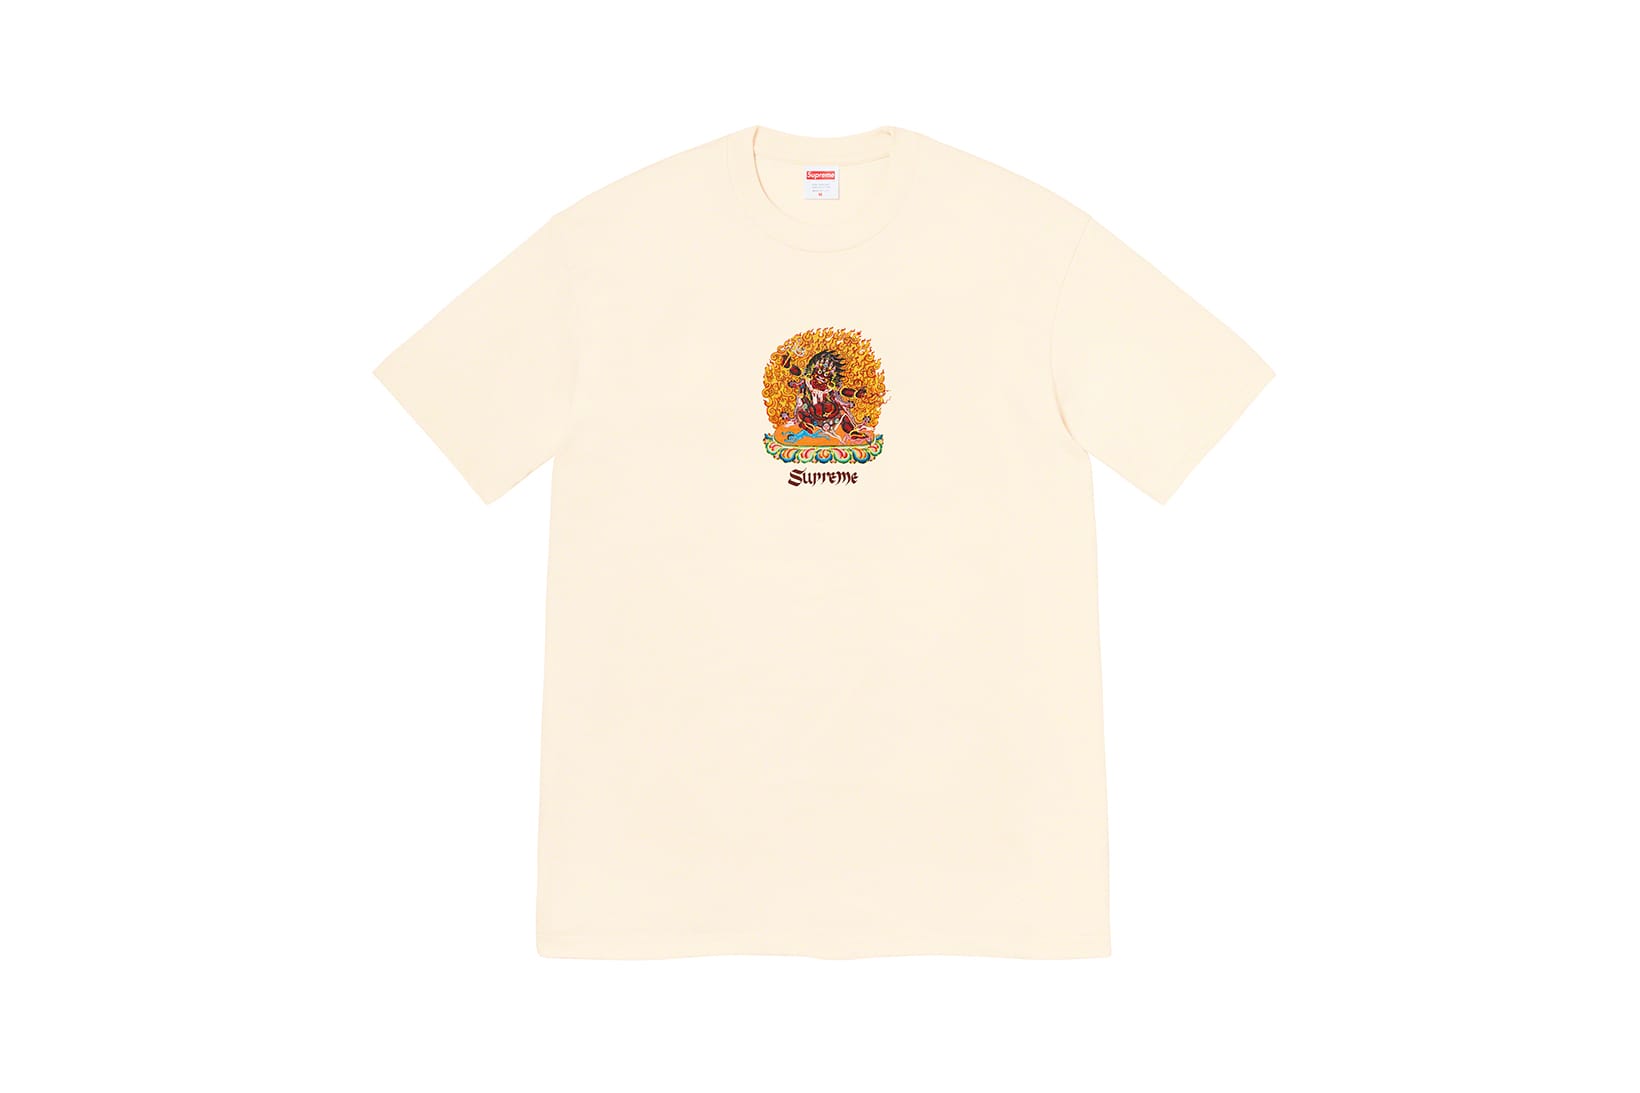 Supreme Releases 8 New Graphic Tees For SS22 | Hypebae